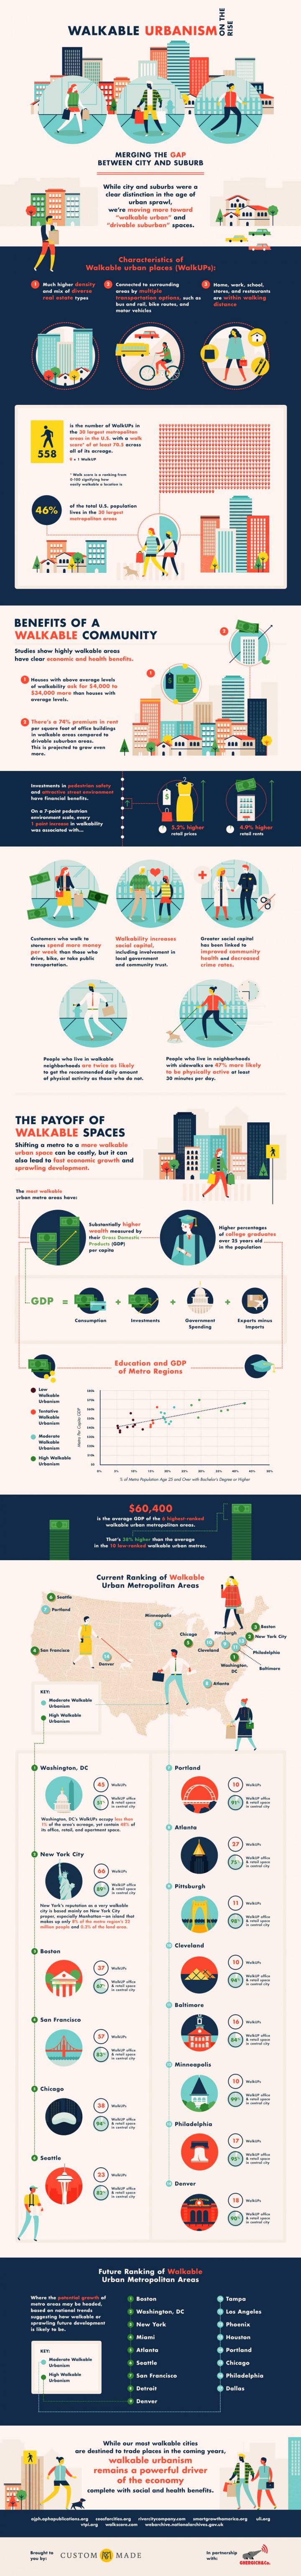 Walkable Urbanism on the Rise Infographic